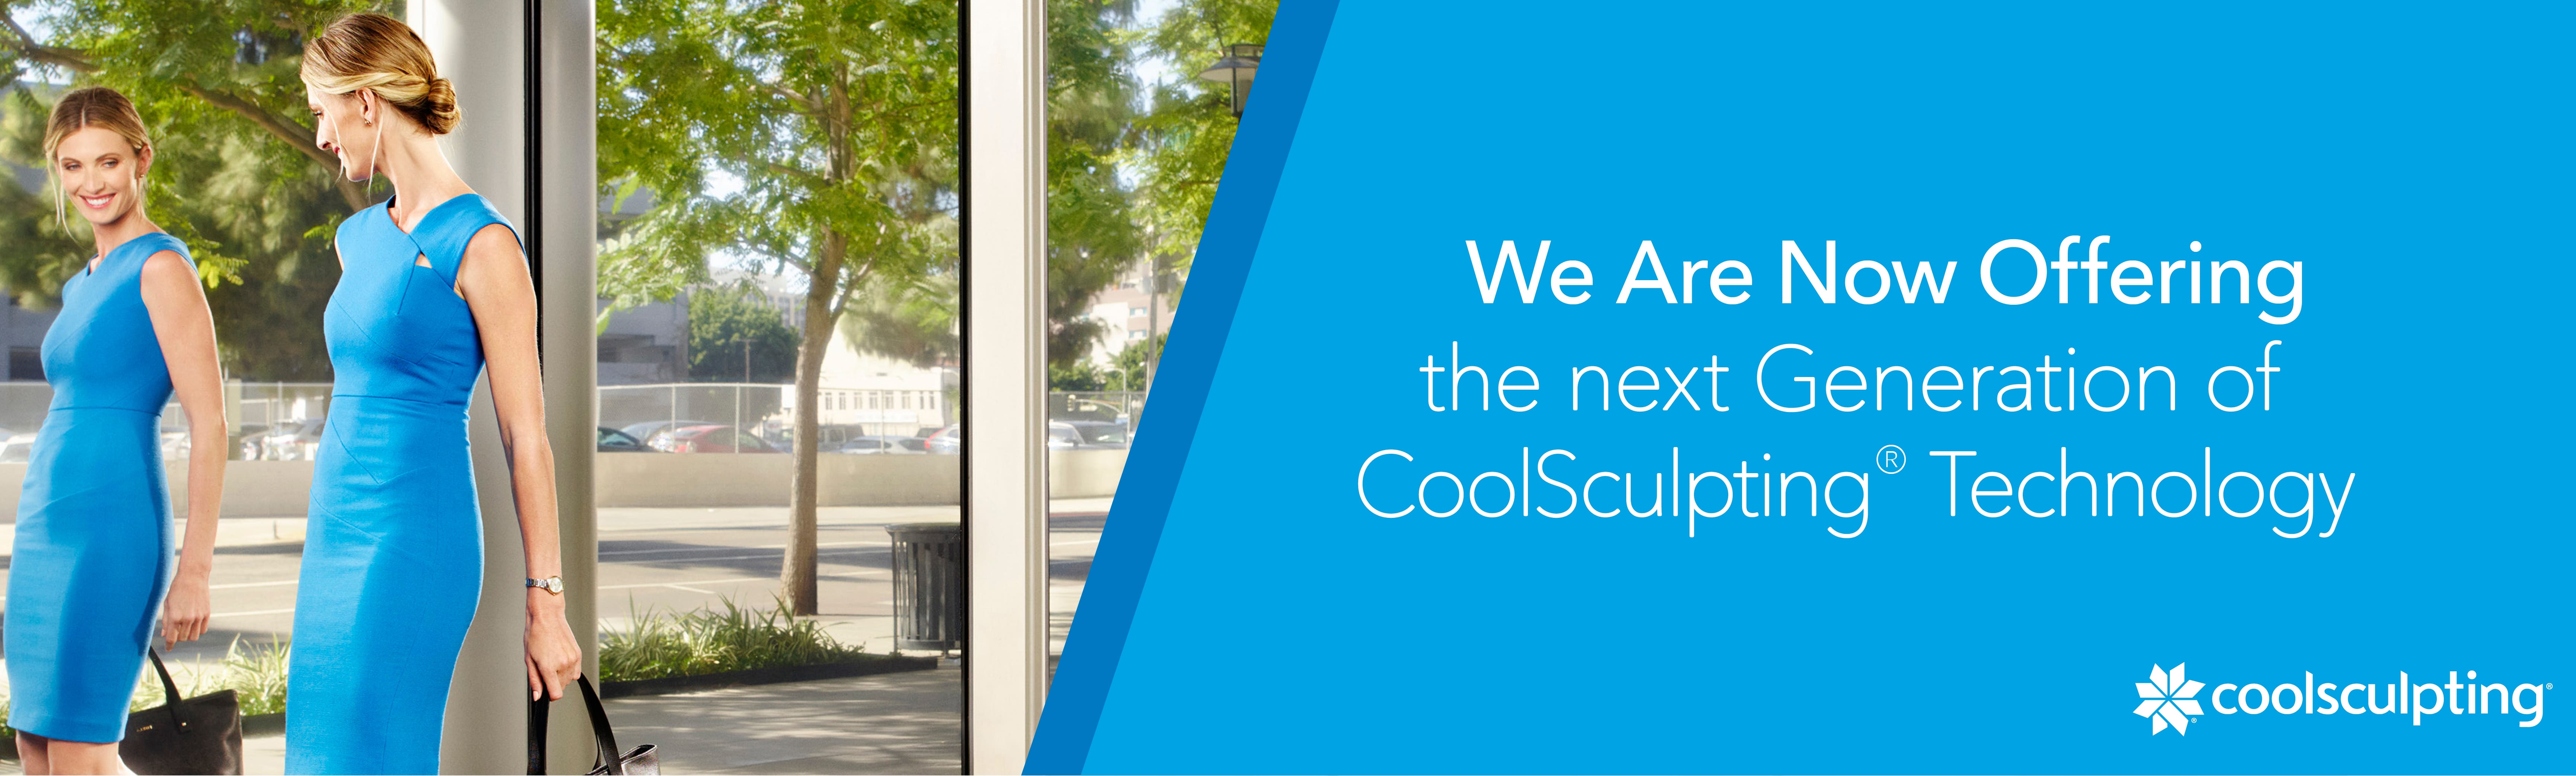 We are now offering the next generation of CoolSculpting technology